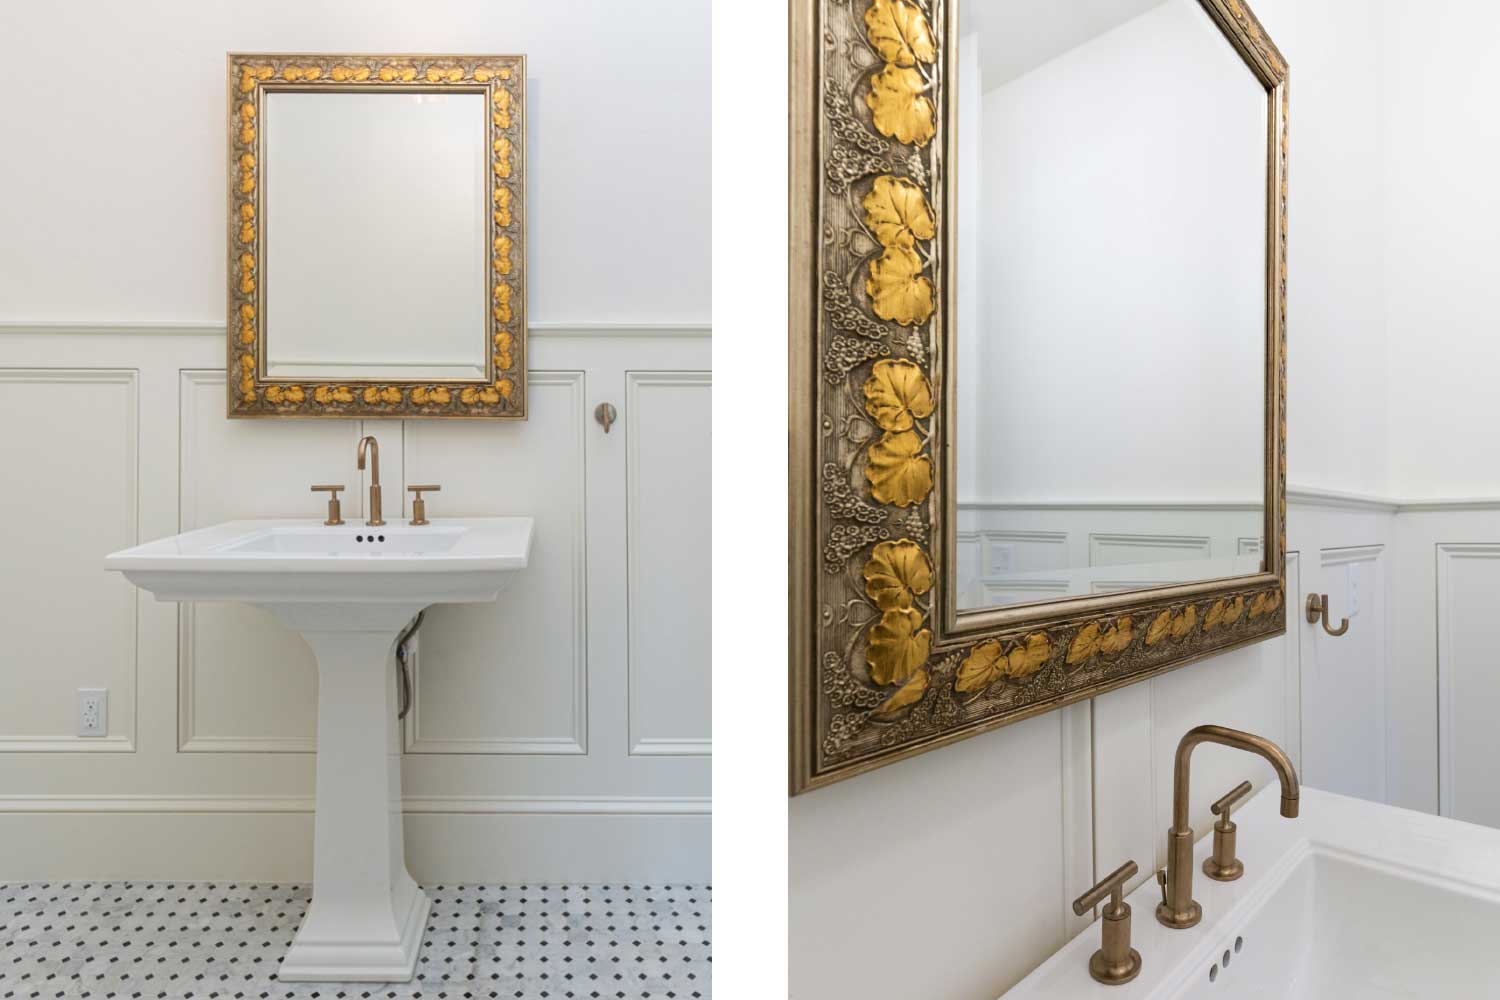 Pedestal sink with gold faucet and gold framed mirror